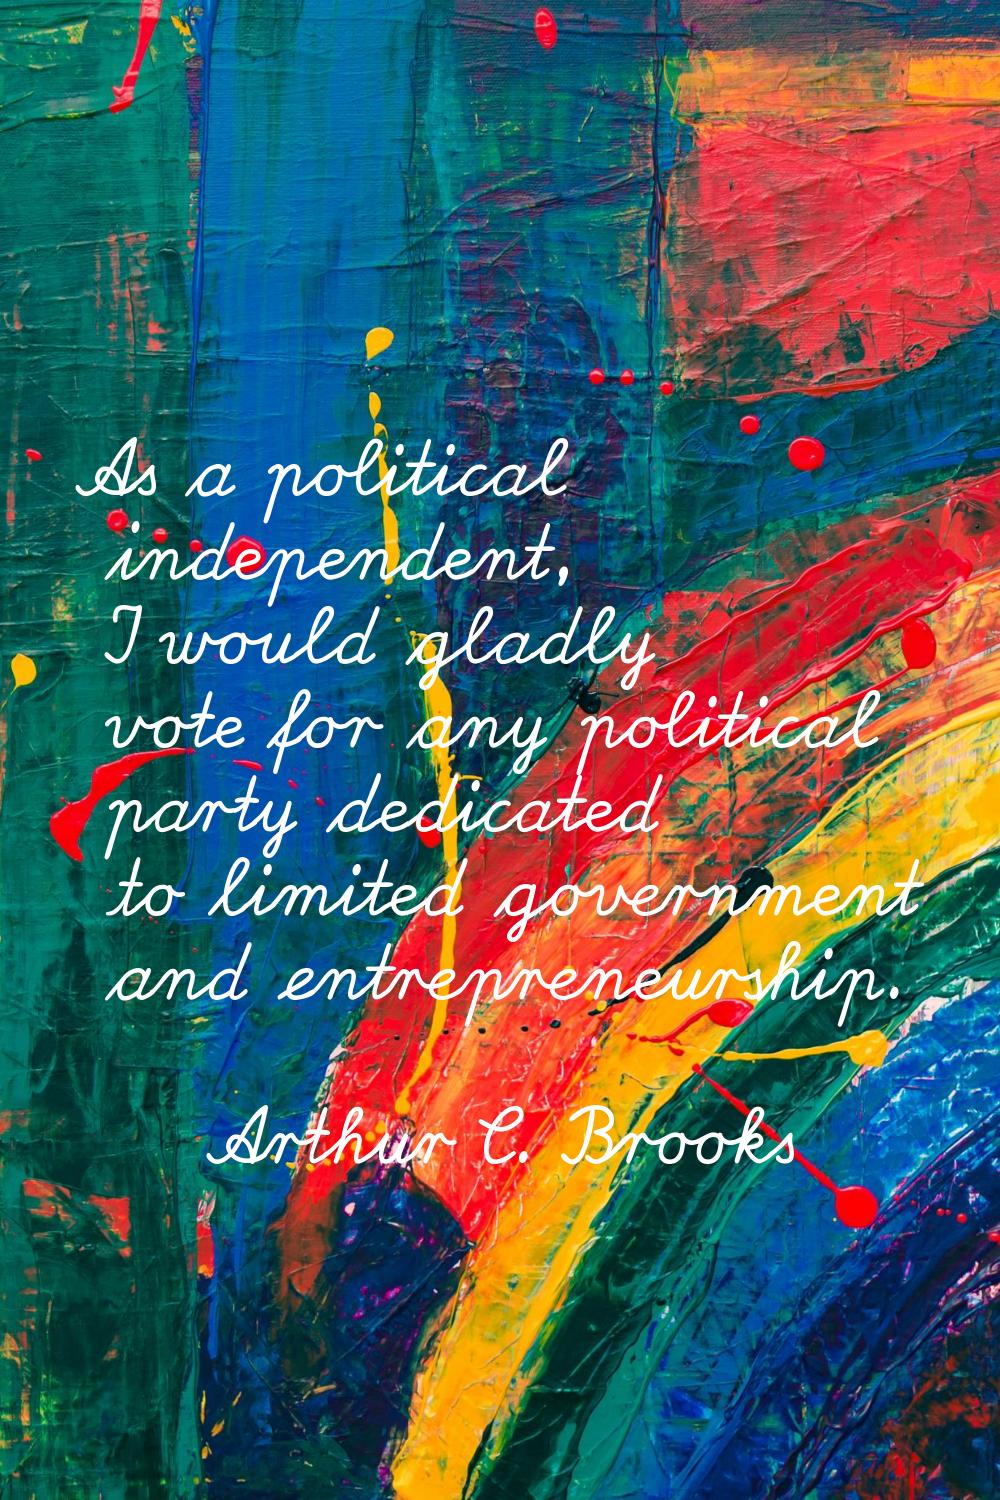 As a political independent, I would gladly vote for any political party dedicated to limited govern